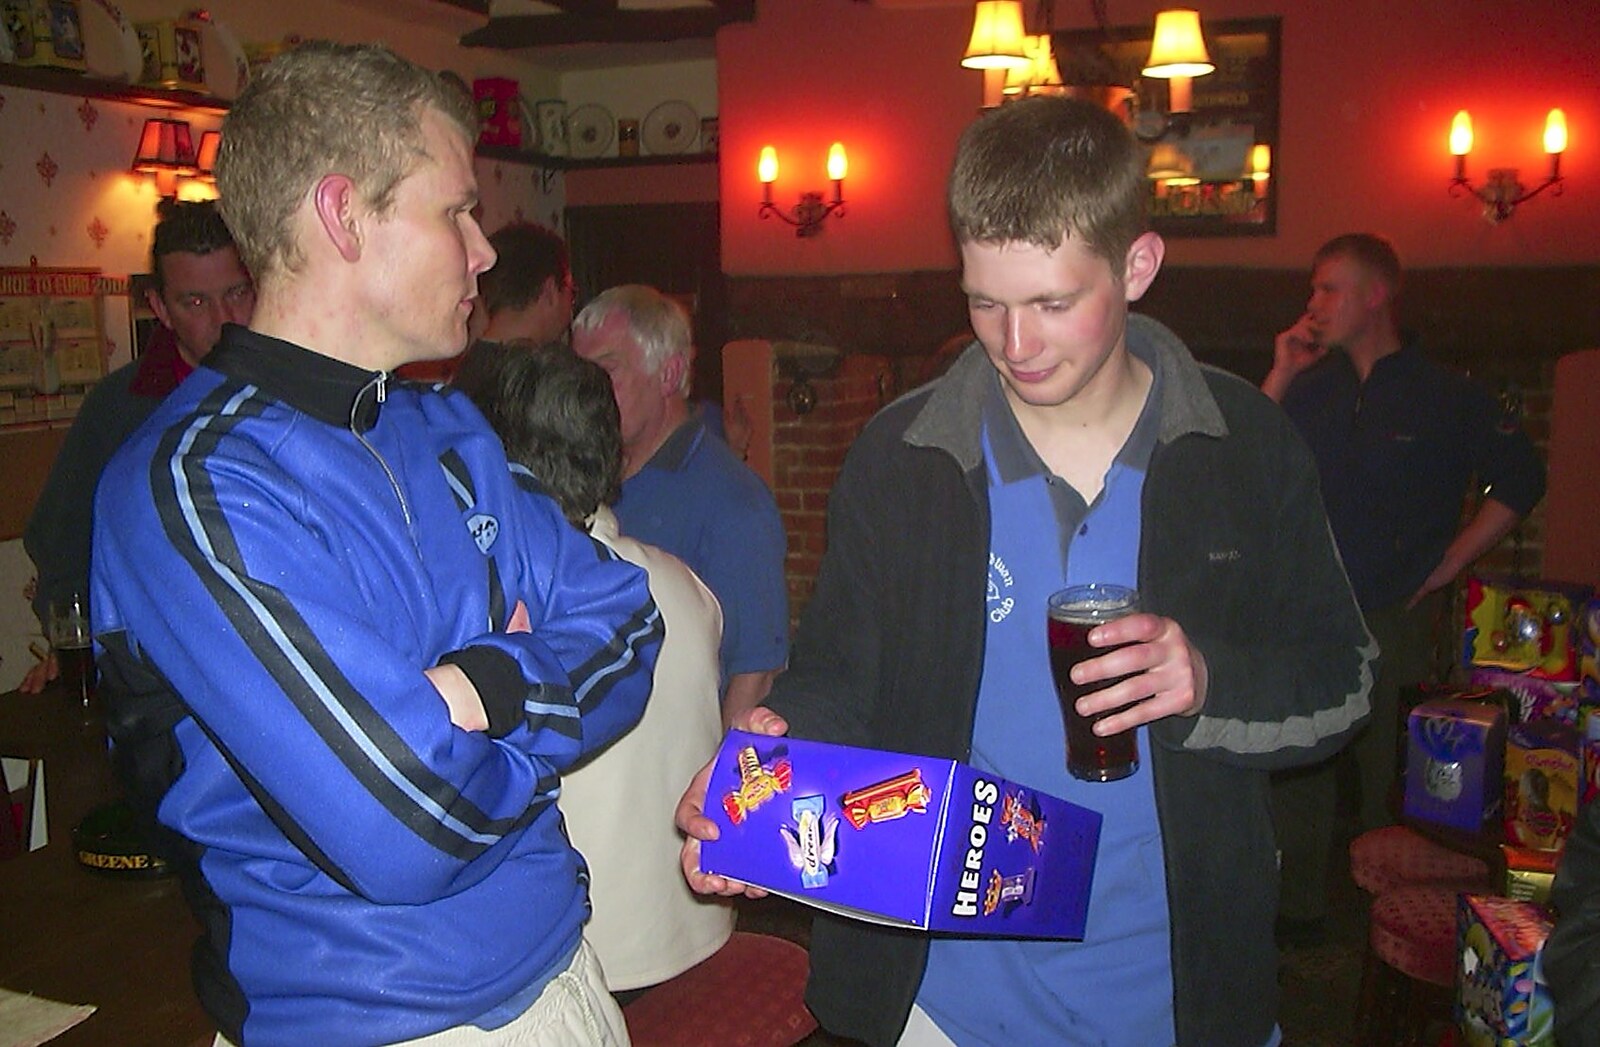 Wednesday and Thursday: The BSCC Season Opens, and Stuff Happens, Suffolk - 9th April 2004: The Boy Phil inspects a prize